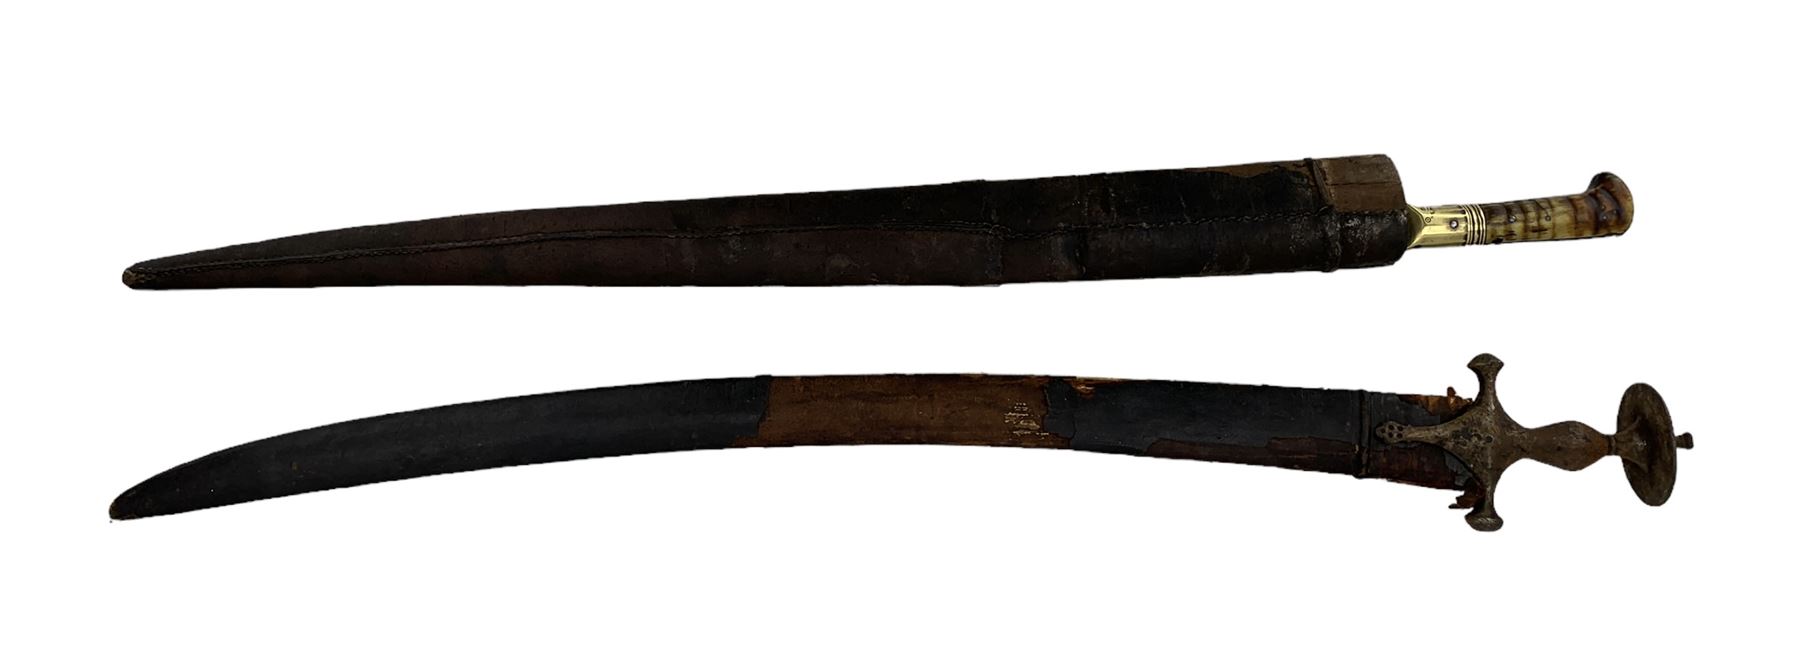 19th century Afghan Khyber knife with horn grip and scabbard L84cm overall and a 19th century Indian